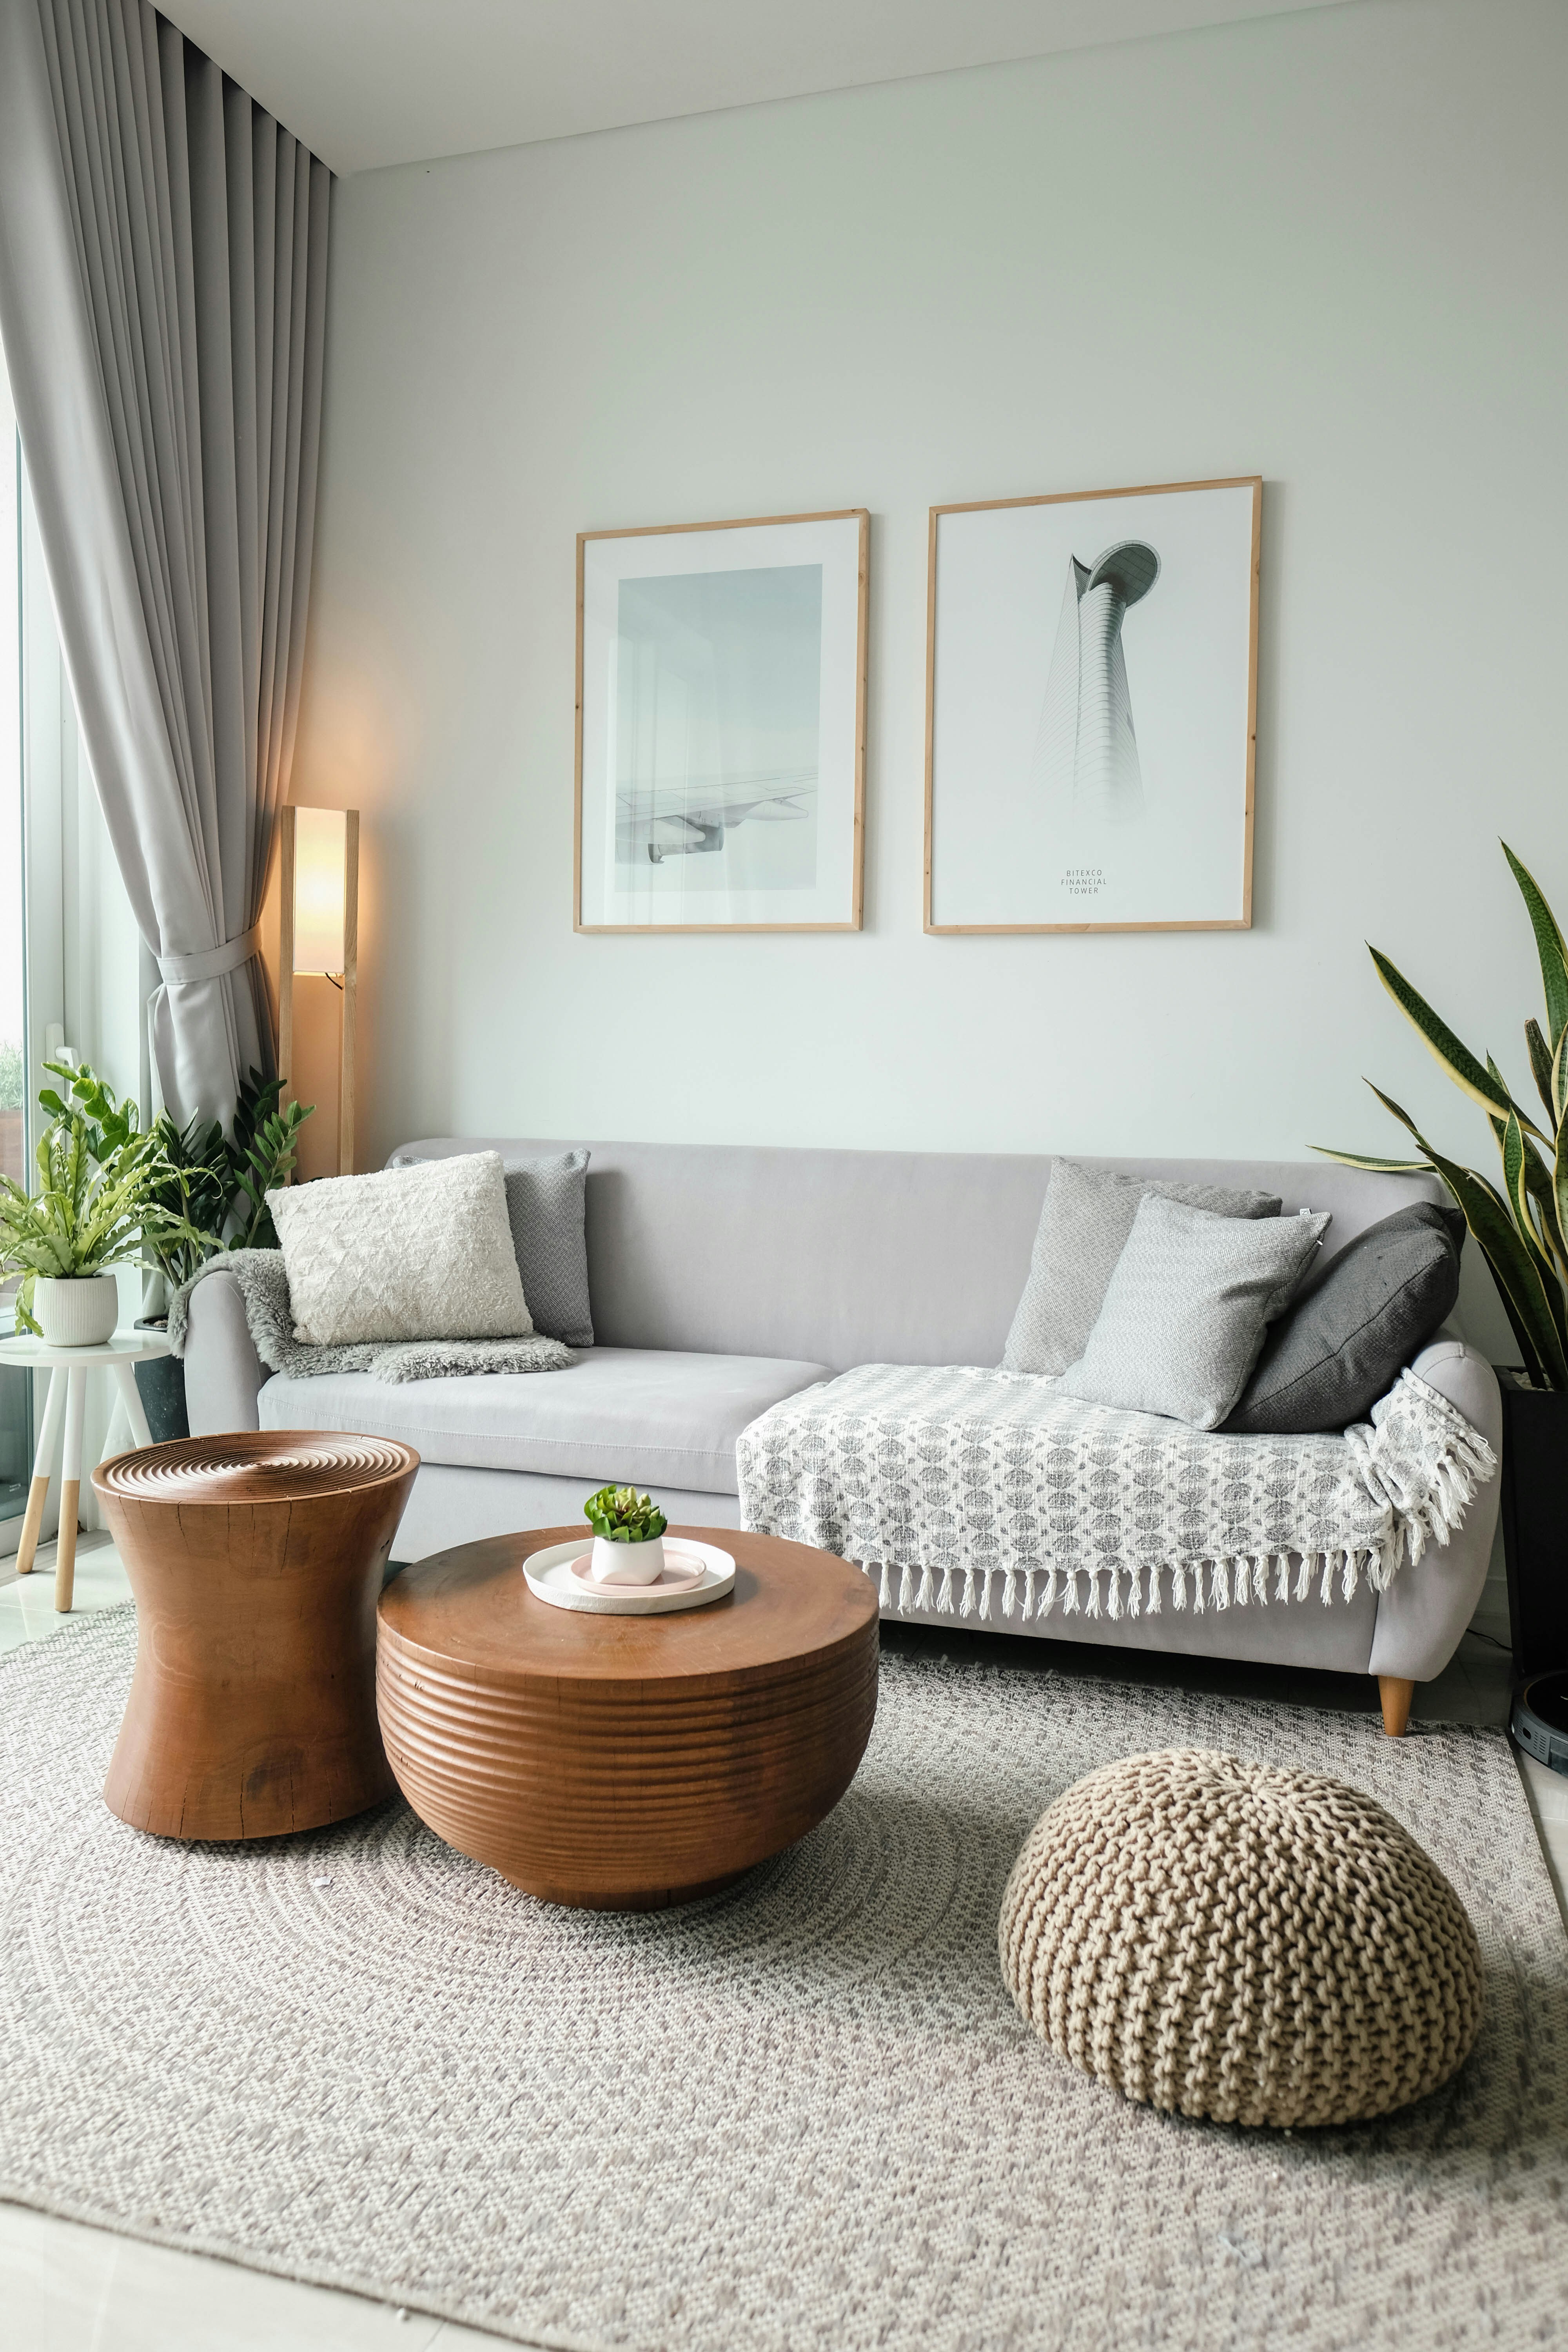 Minimalist Living Room Decor: Embrace Simplicity and Elegance in Your Space